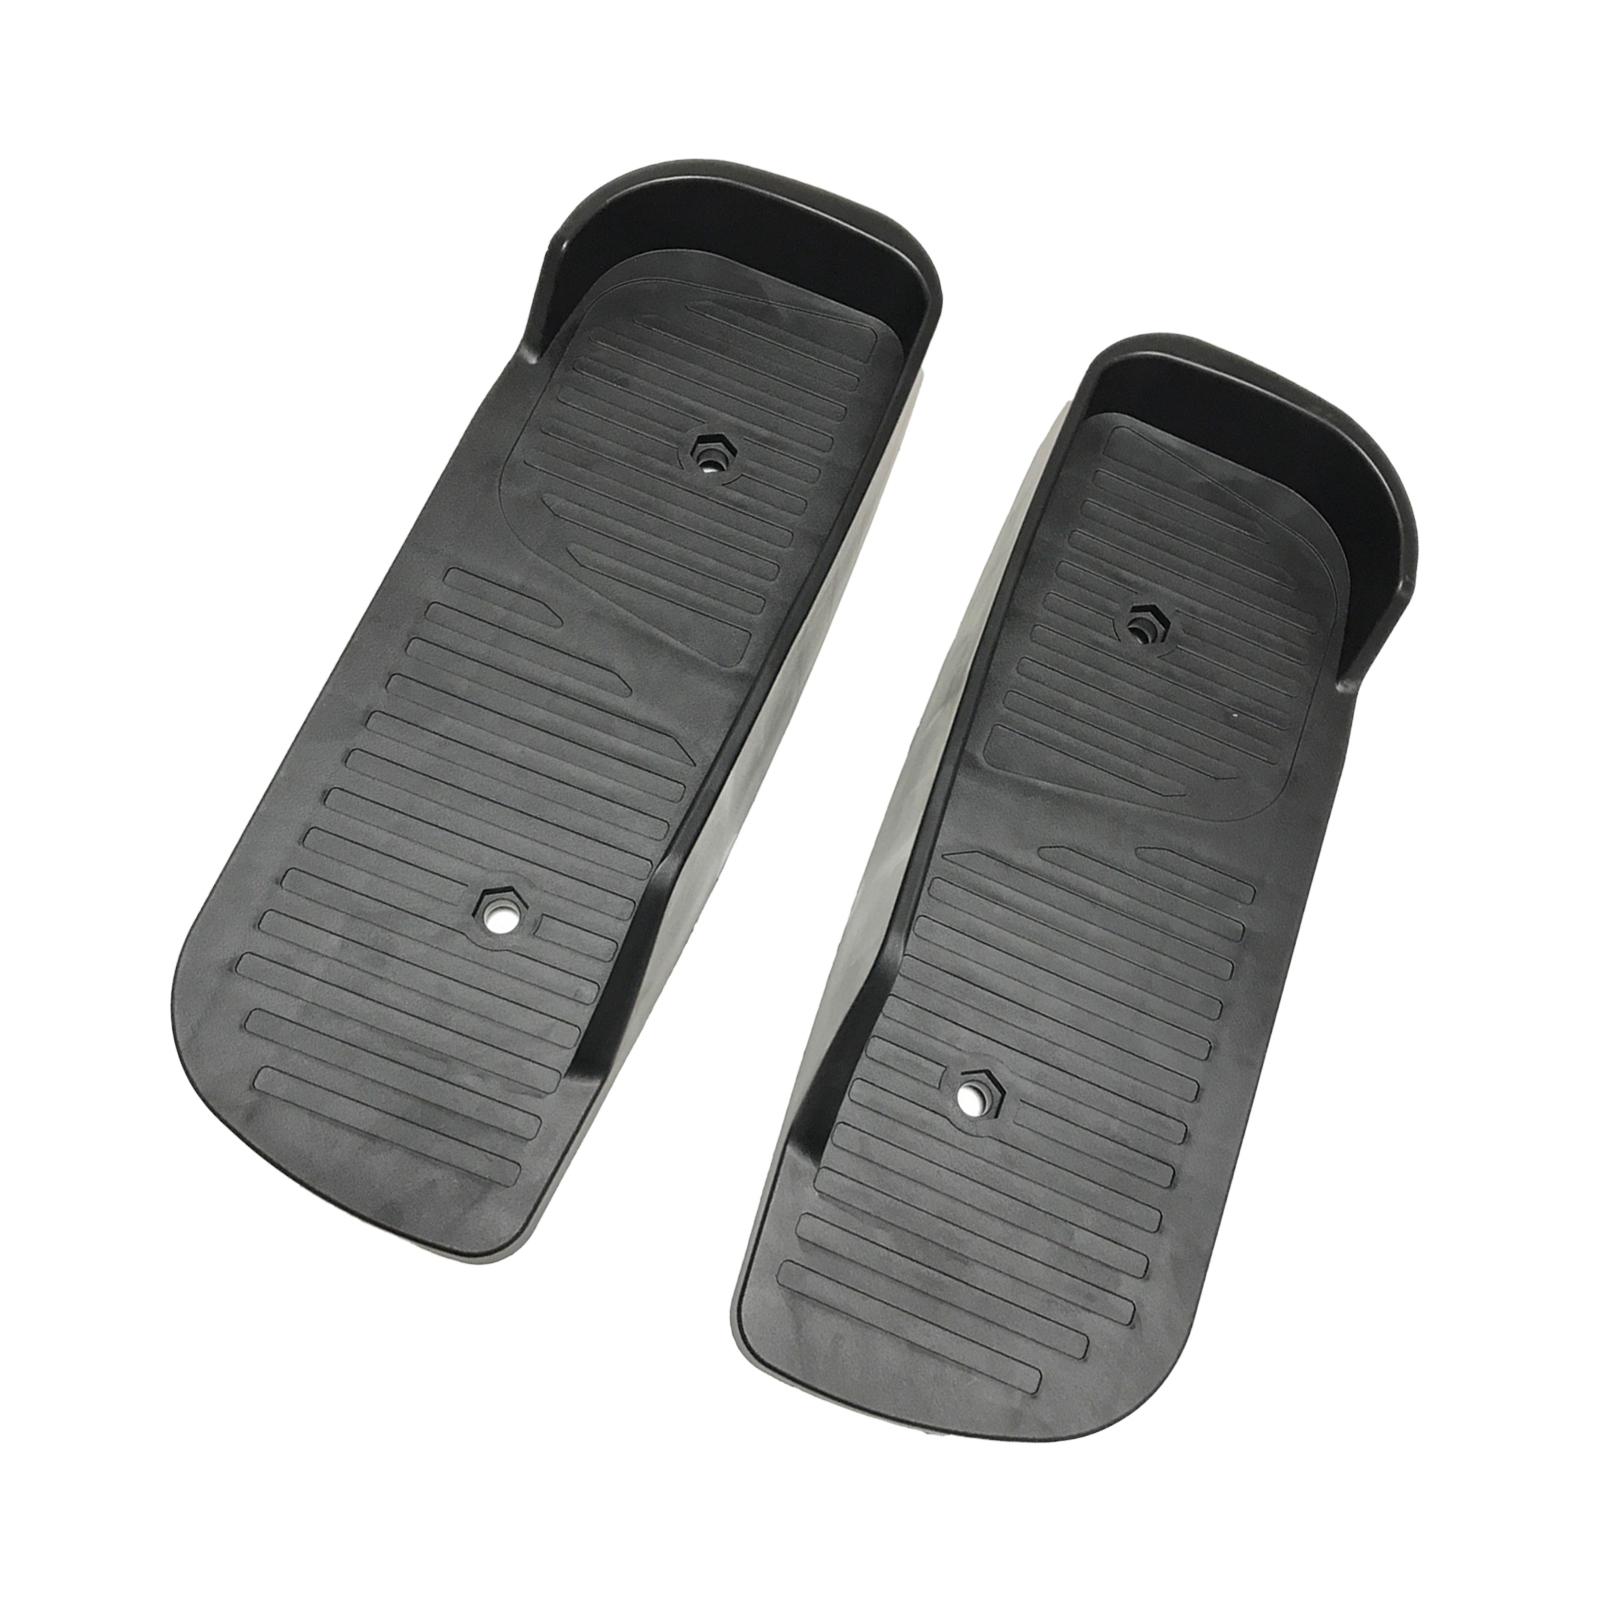 2Pcs Trainer Machine Foot Pedals Non Slip Fittings for Workout Fitness Bike